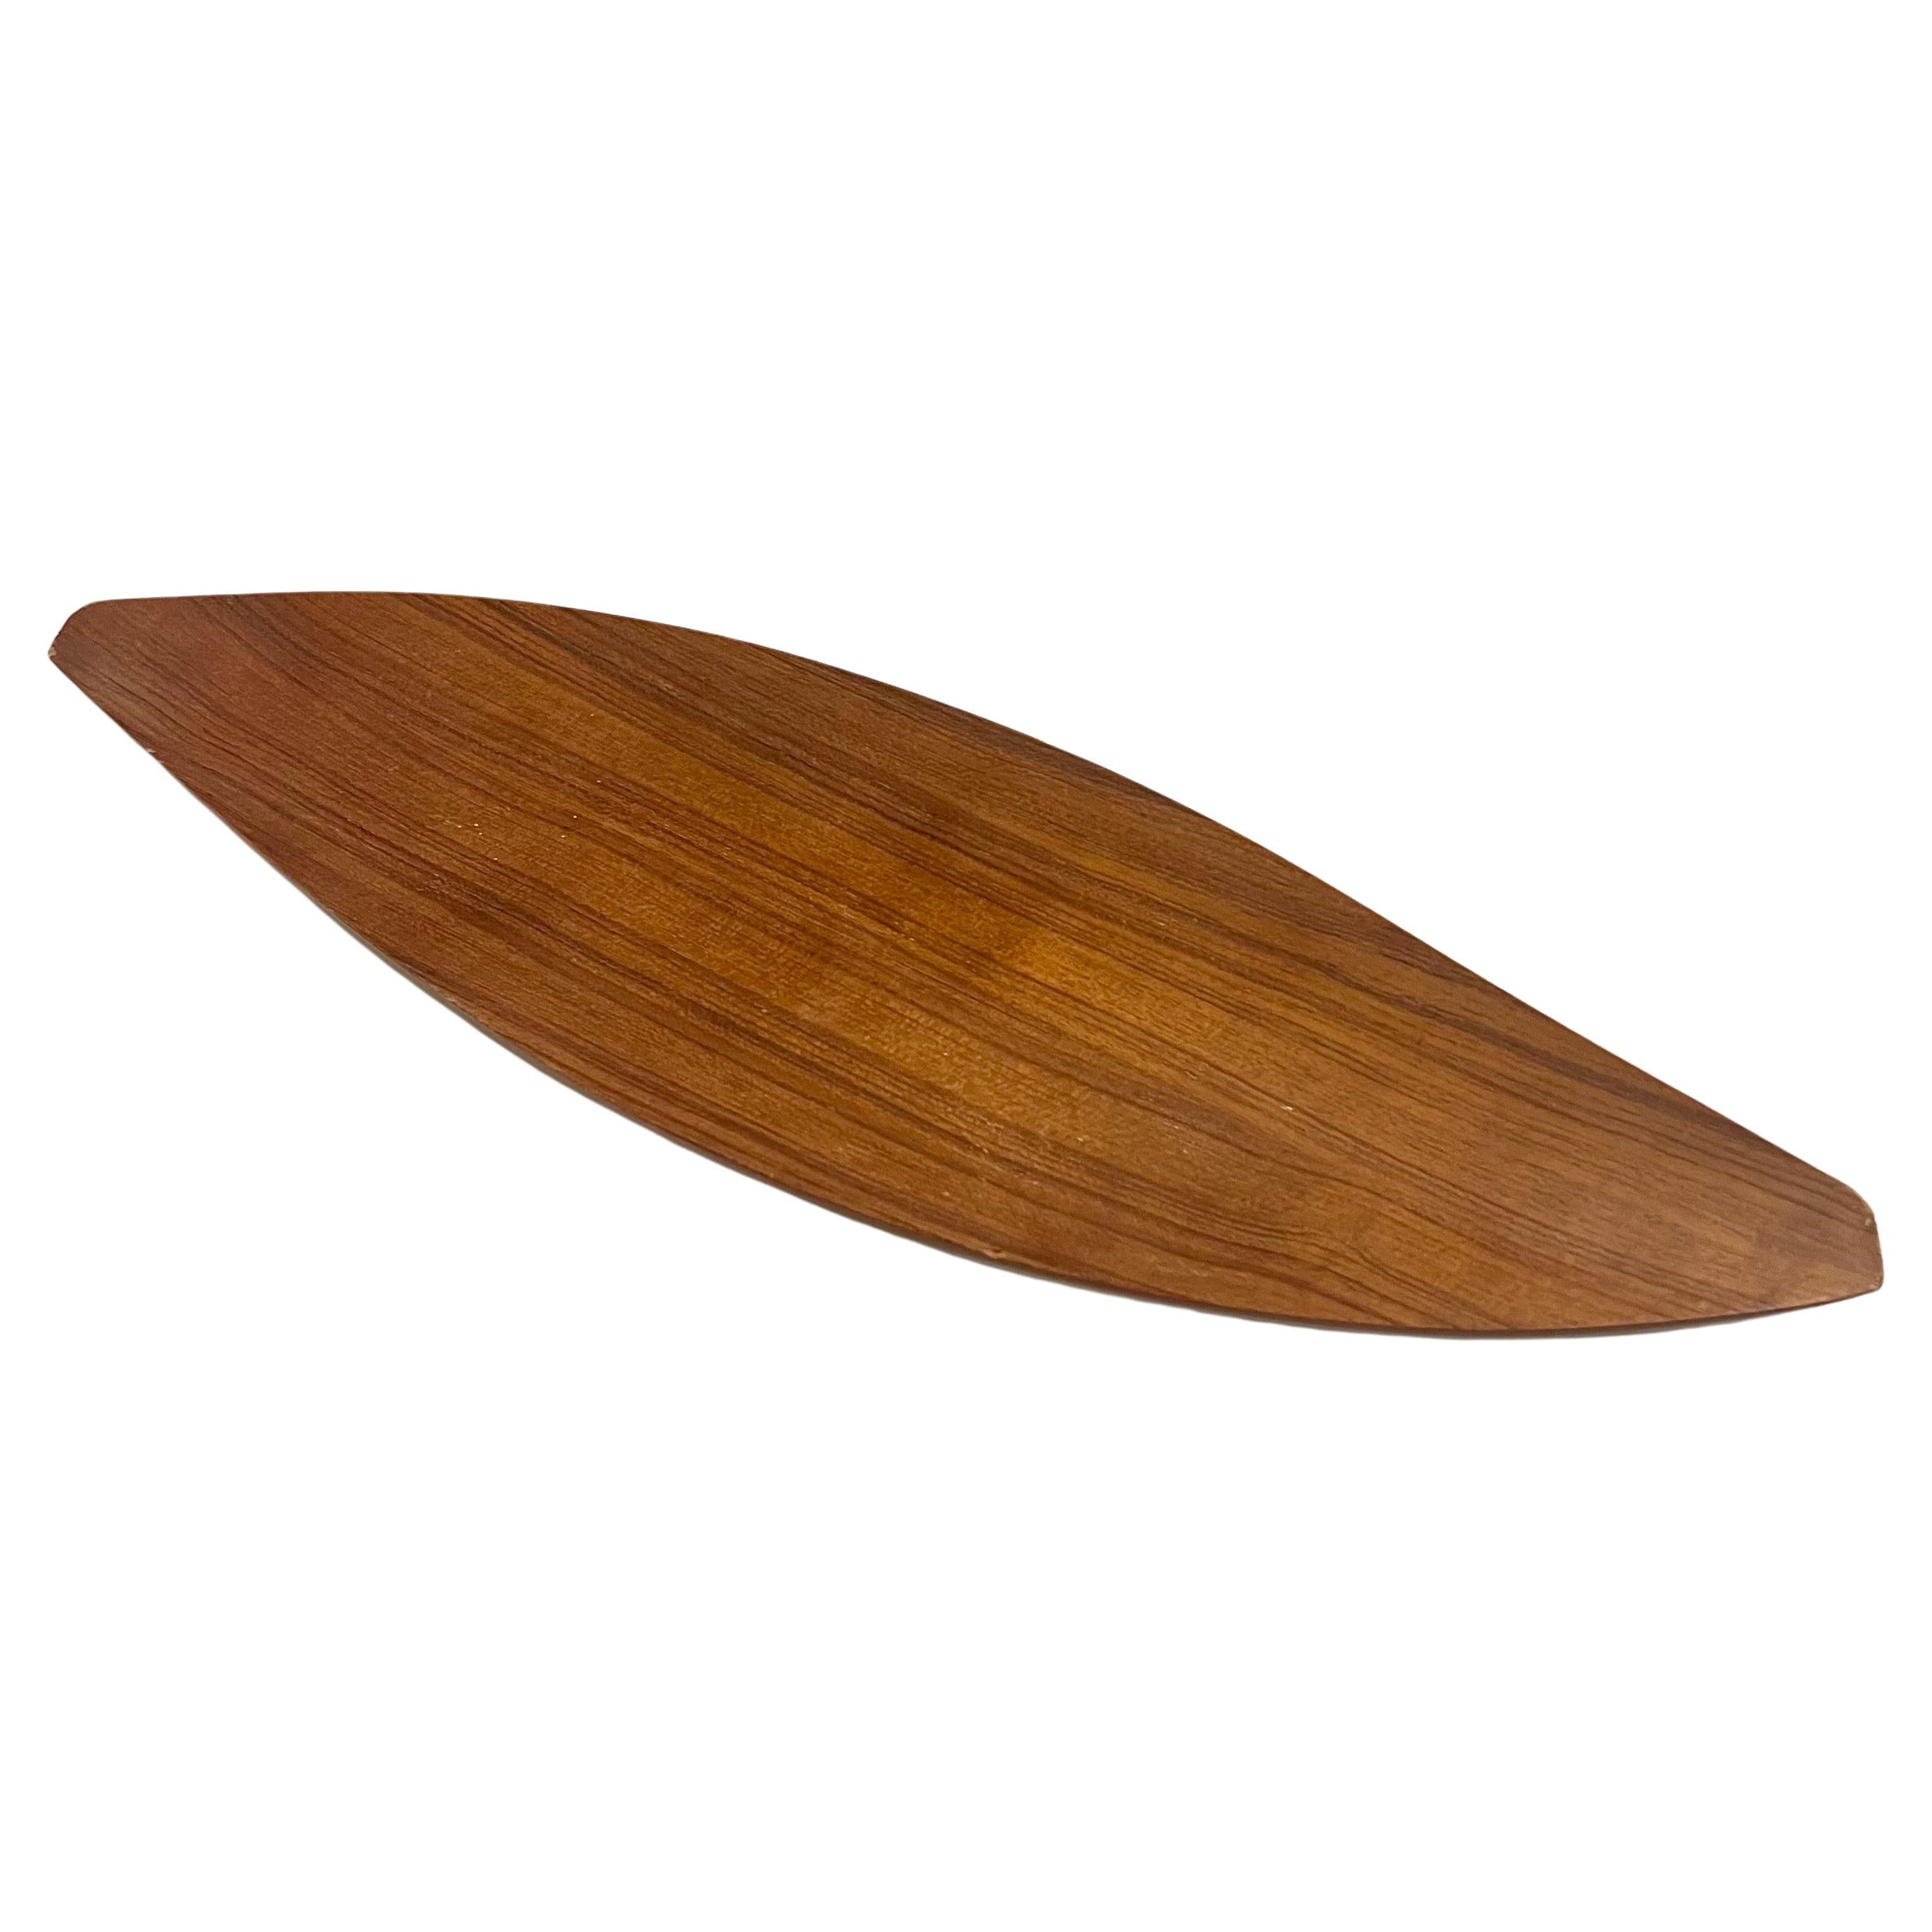 Beautiful mid century modern teak plywood bentwood leaf tray designed by Shigemichi Aomine for National Crafts Council in Japan. with raised edge very rare and gorgeous shape great for Danish Modern &Mid Century home decor.